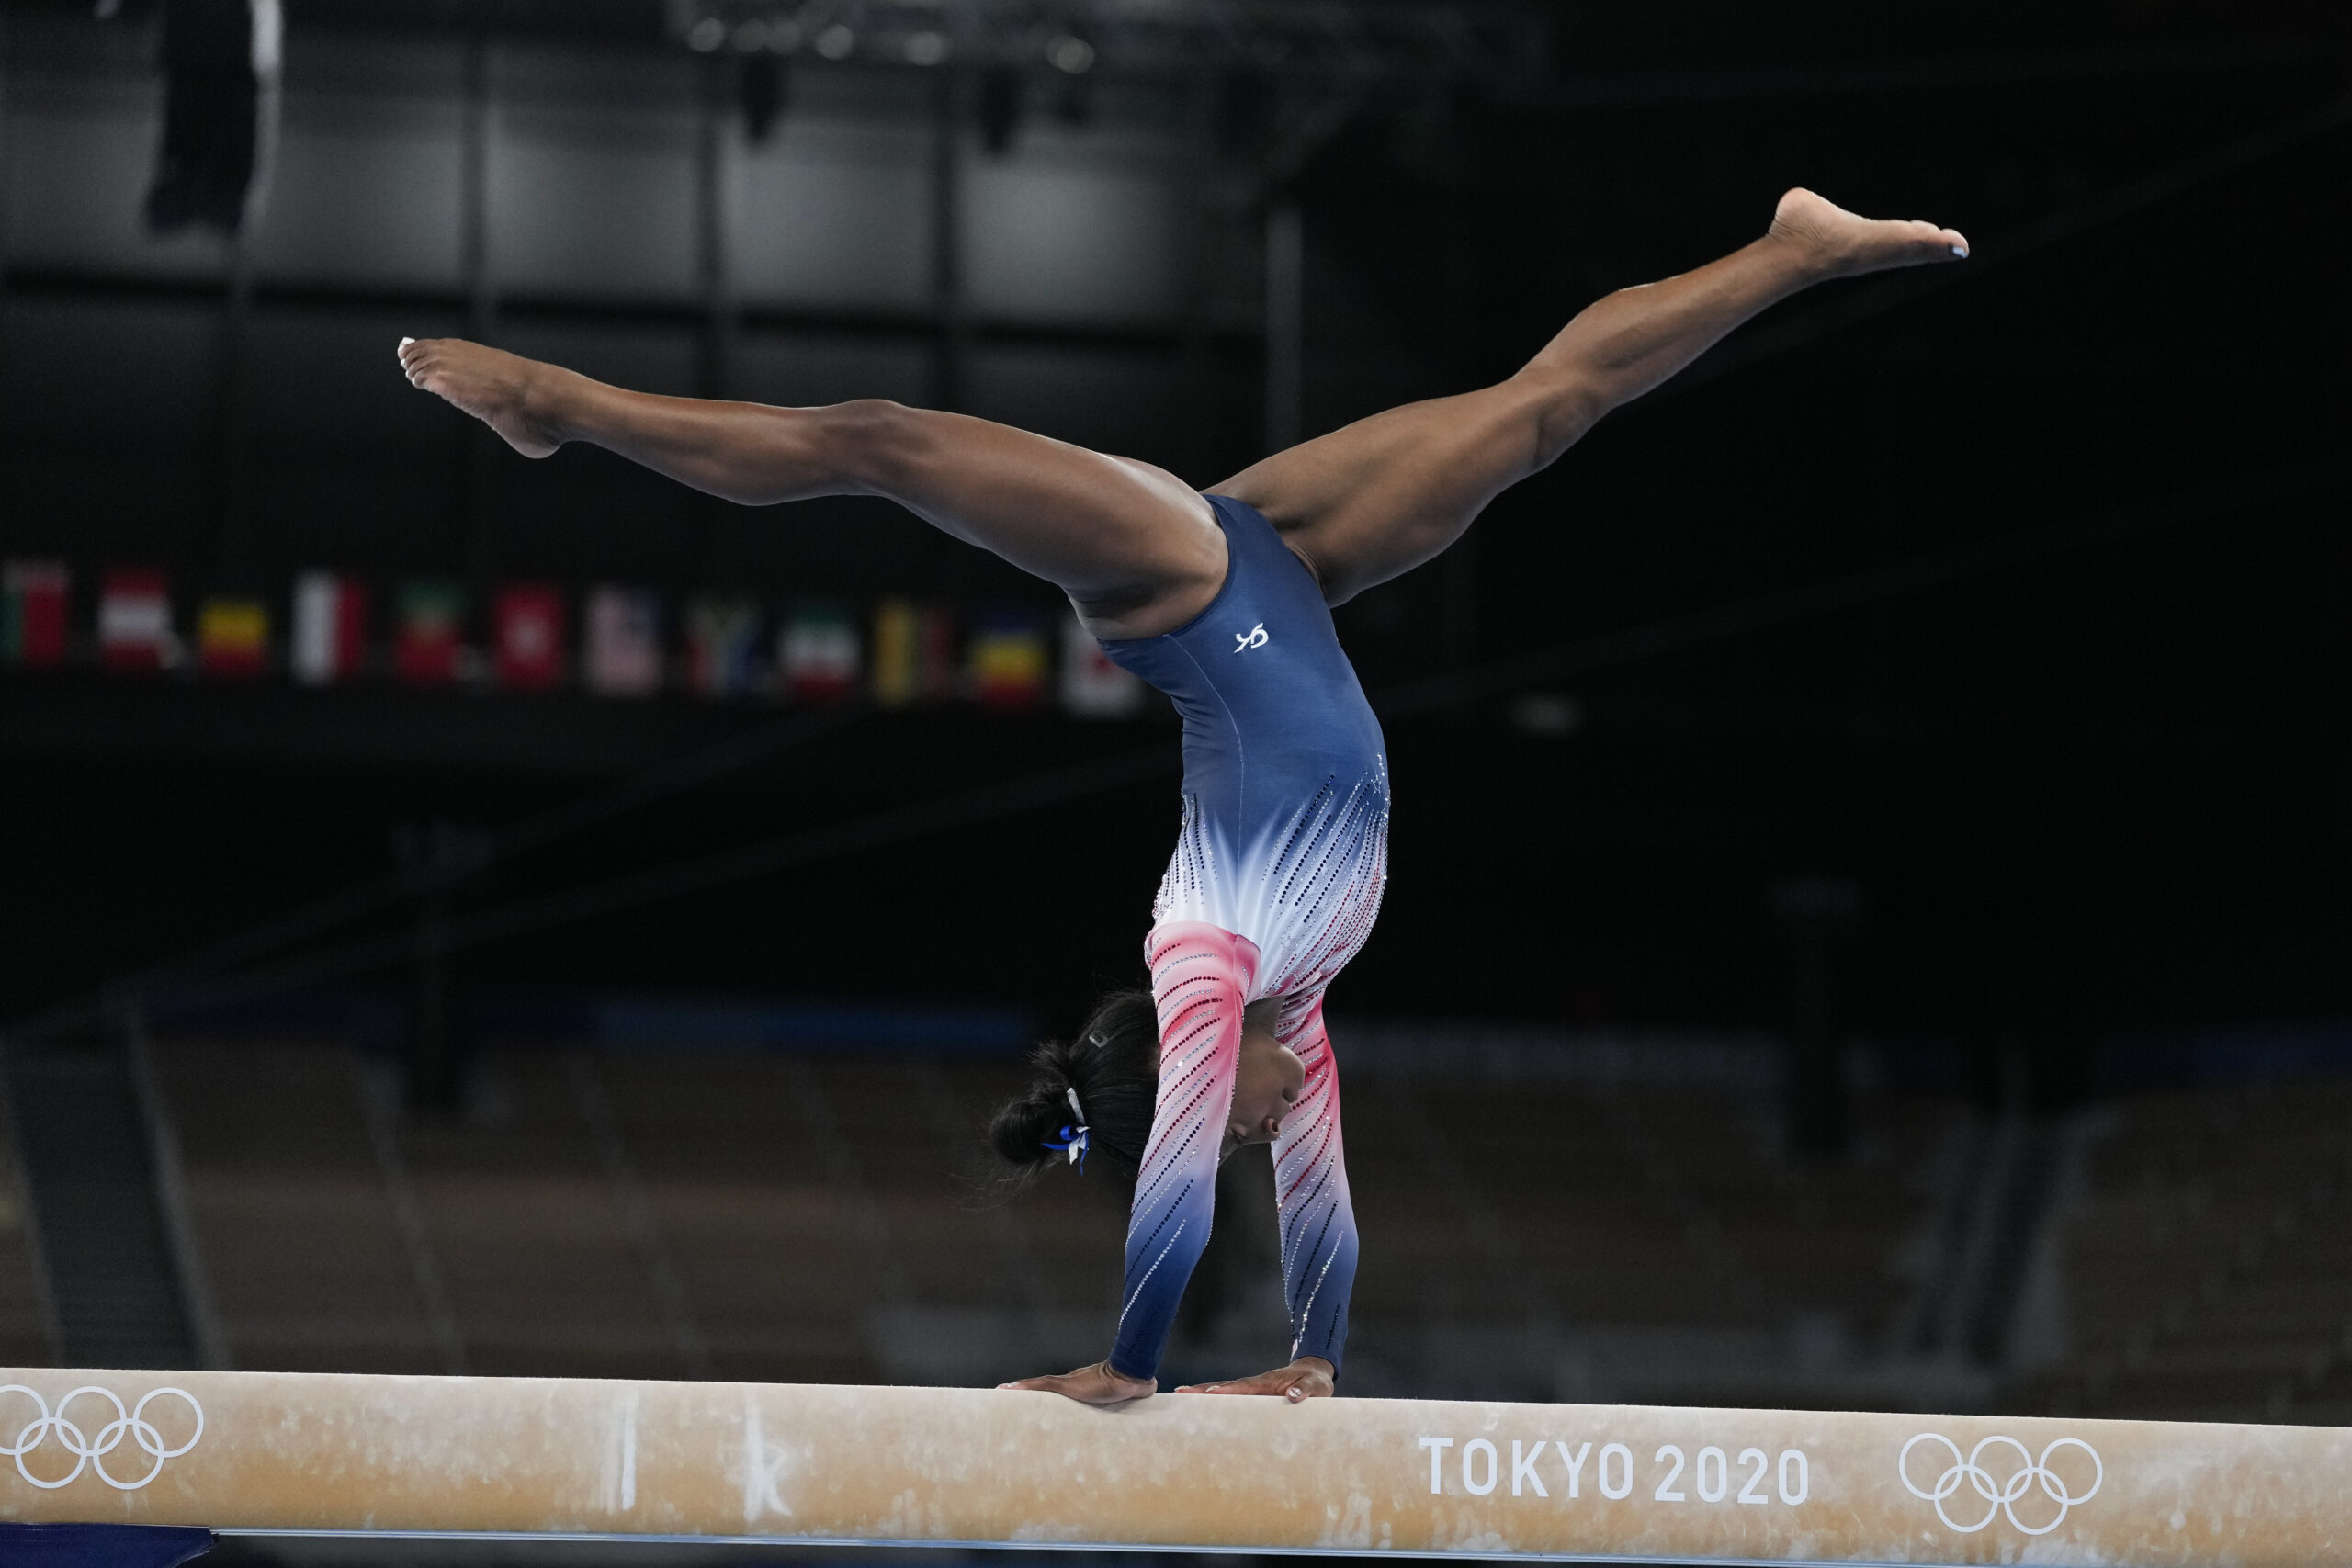 Simone Biles, of the United States, warms up prior to the artistic gymnastics balance beam final at the 2020 Summer Olympics, Tuesday, Aug. 3, 2021, in Tokyo, Japan. (AP Photo/Ashley Landis)